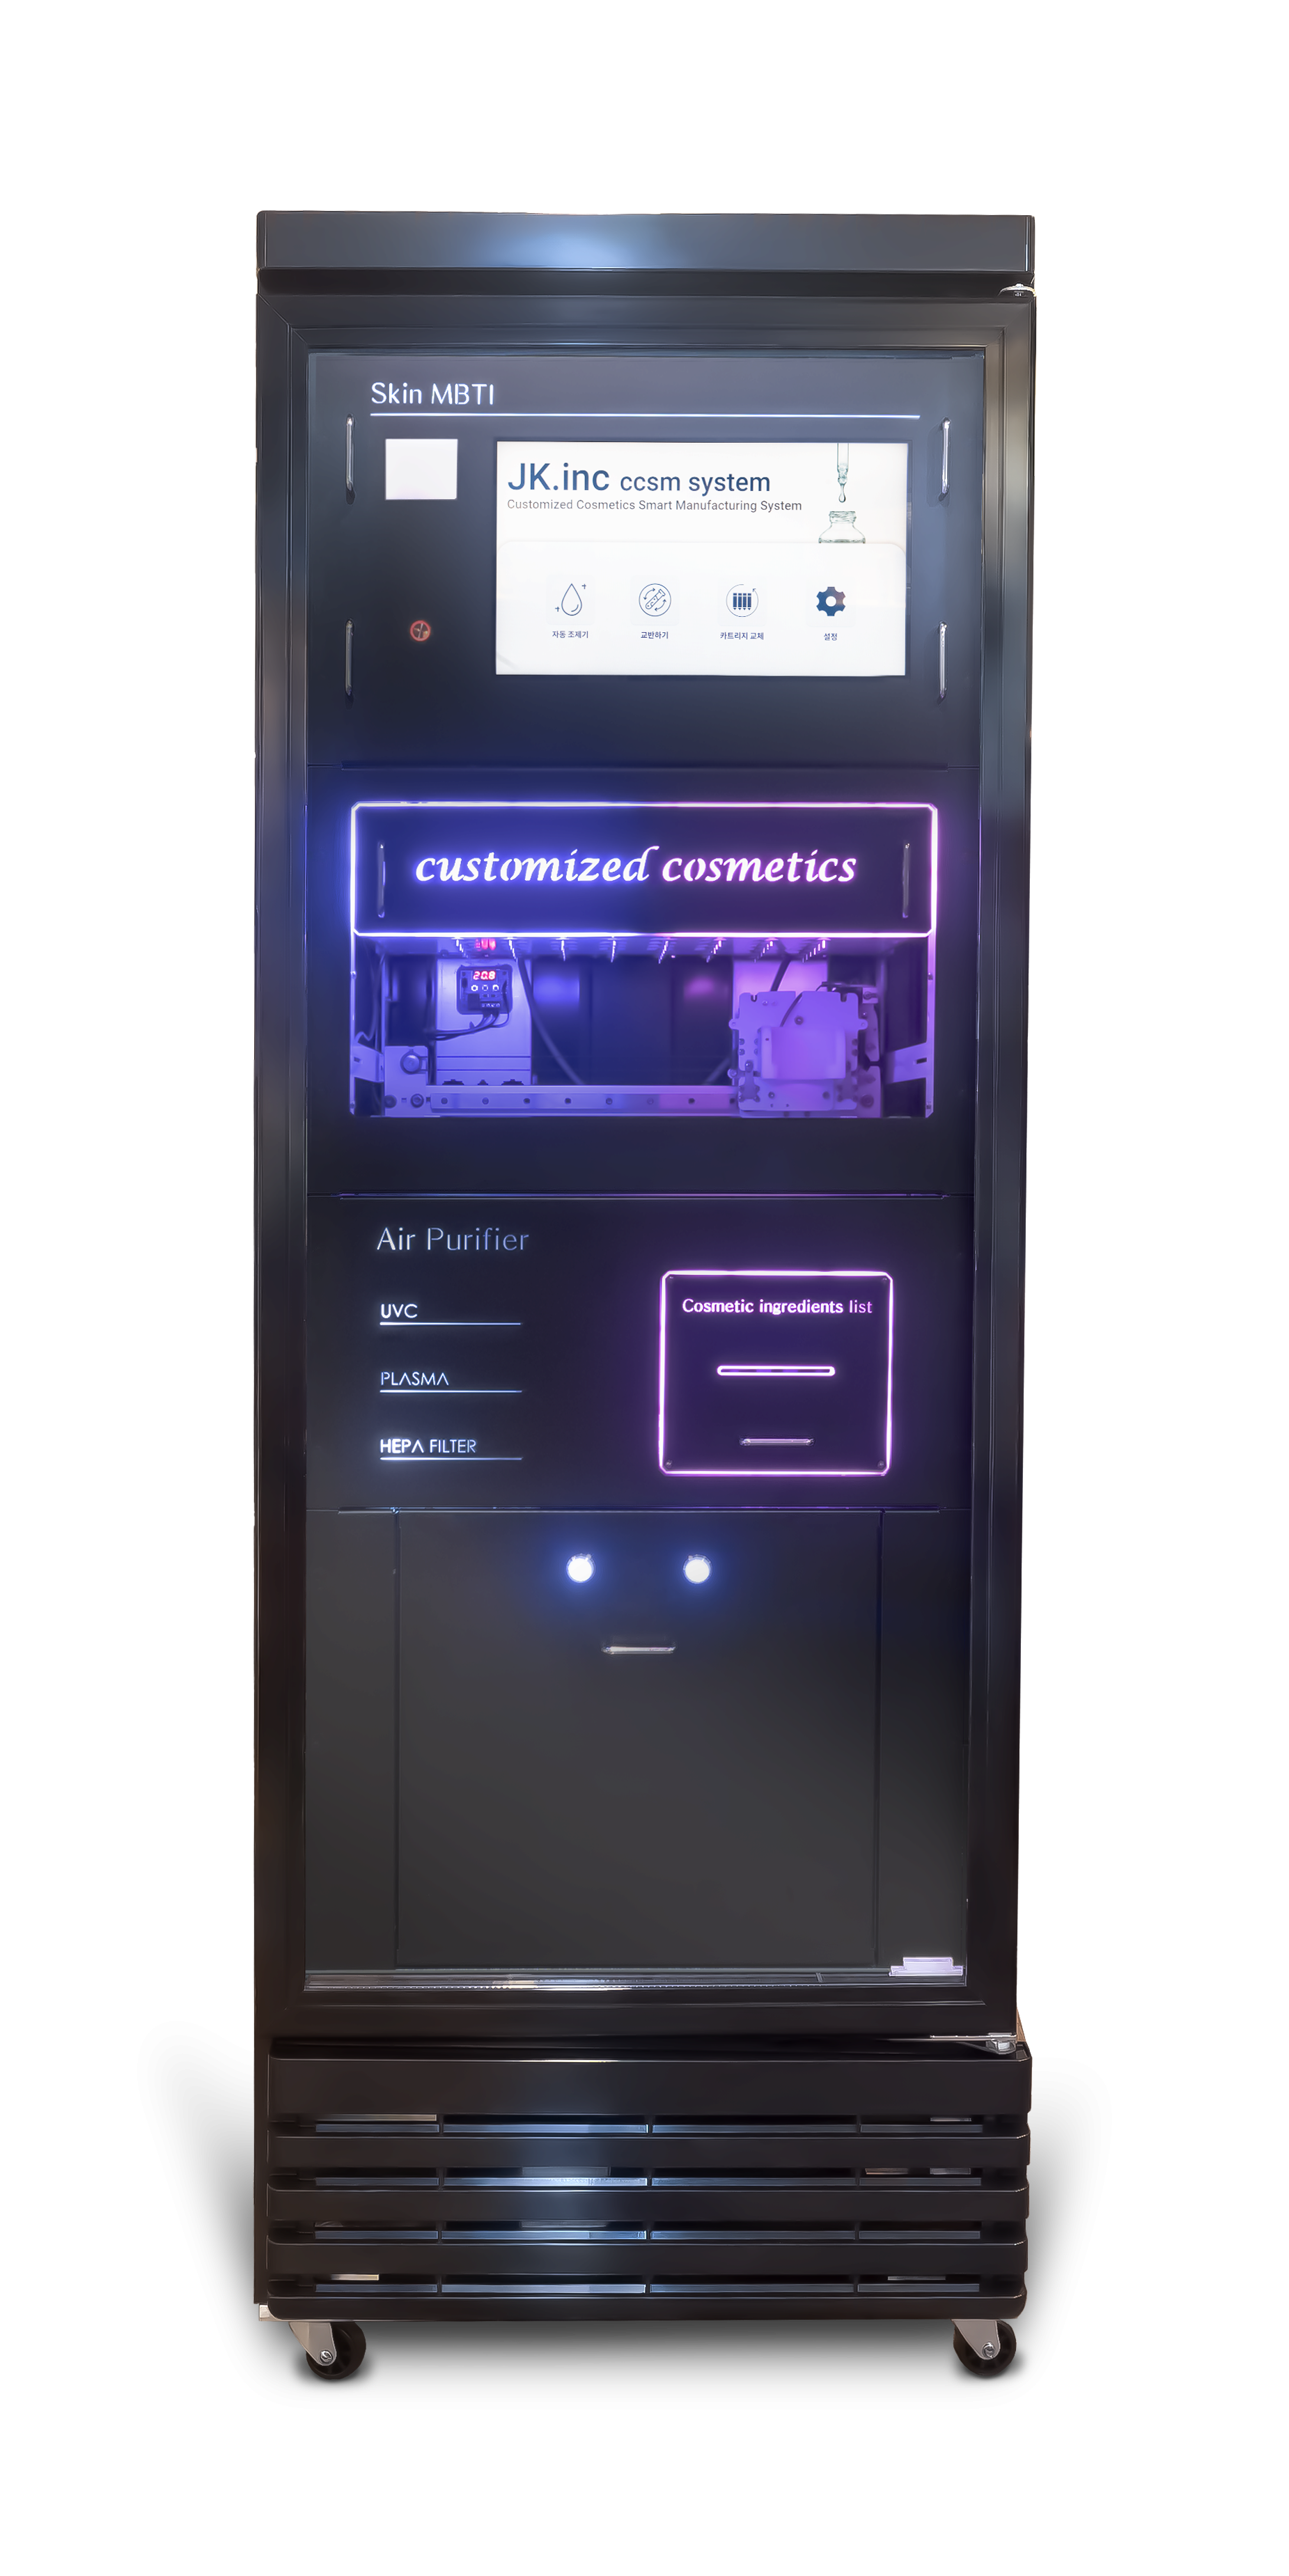 SkinMBTI machine for instant and personalized skincare product offering